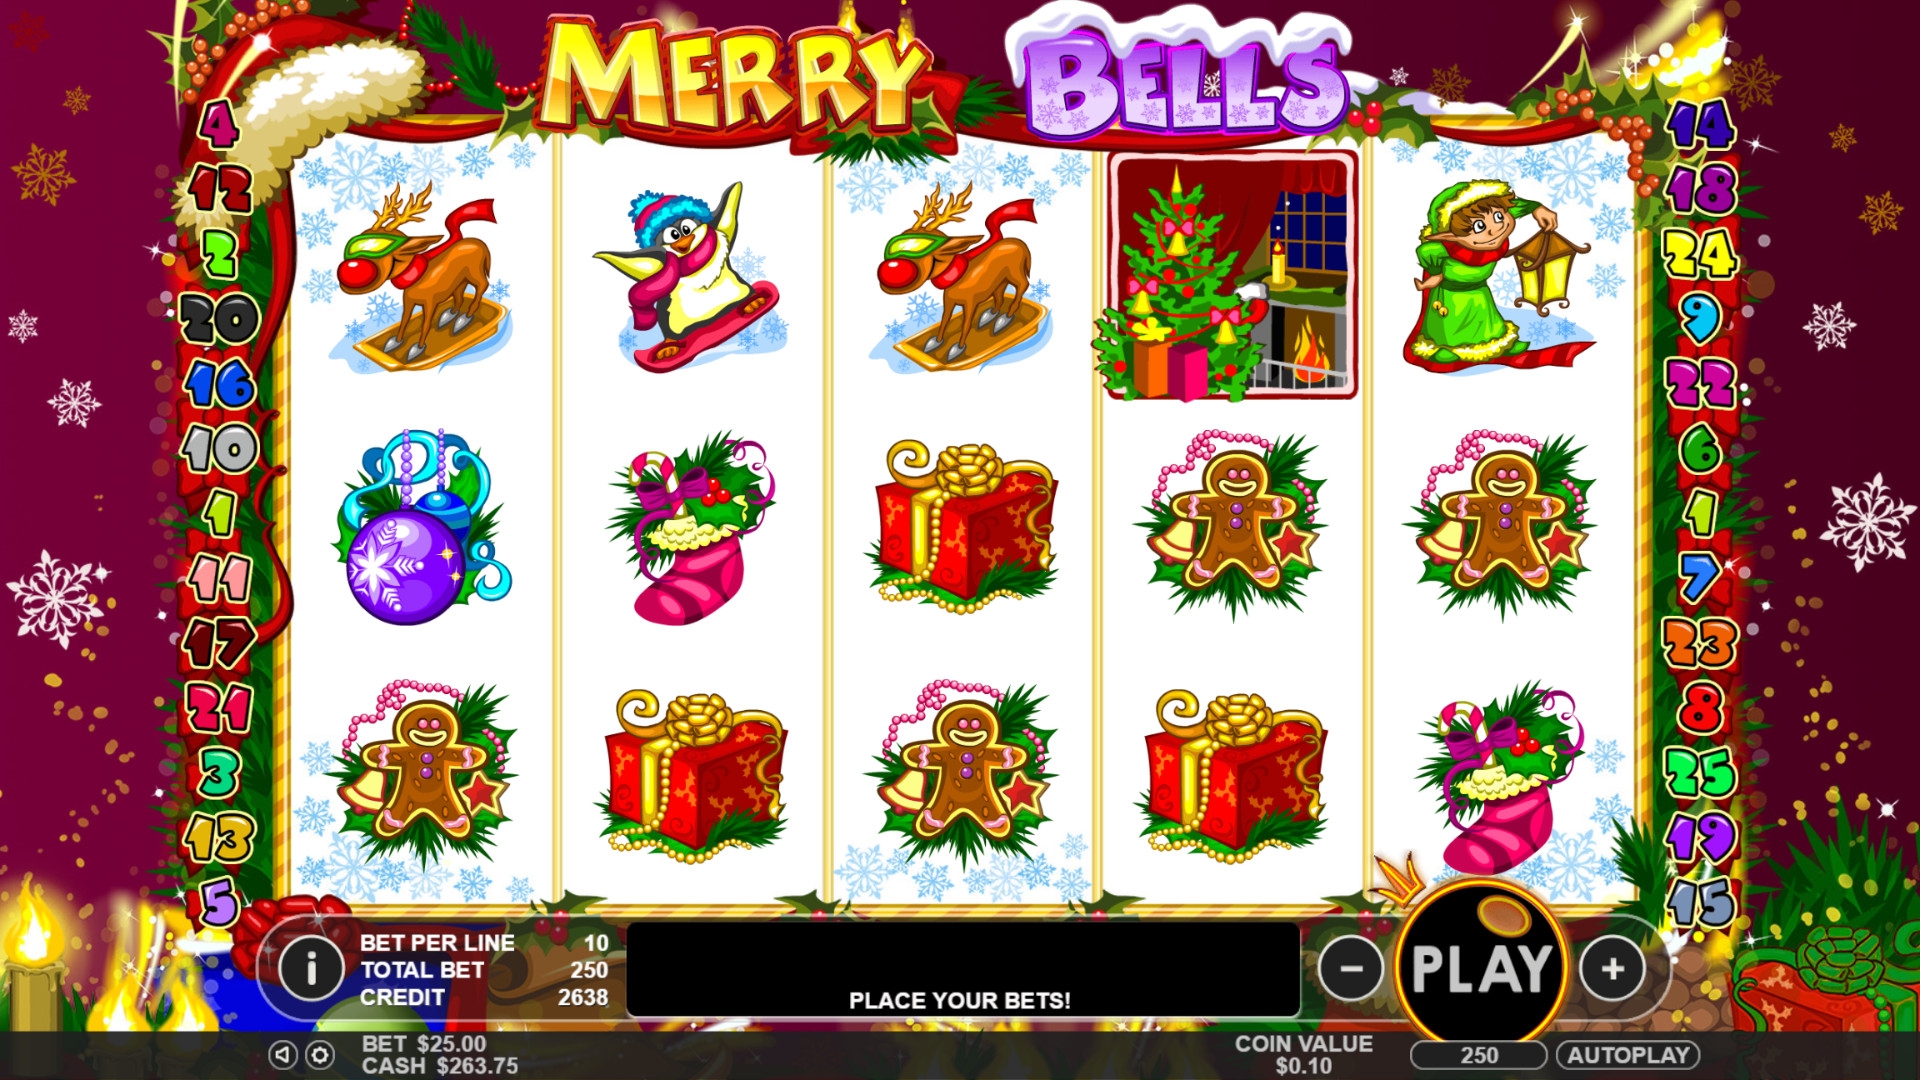 Merry Bells (Merry Bells) from category Slots